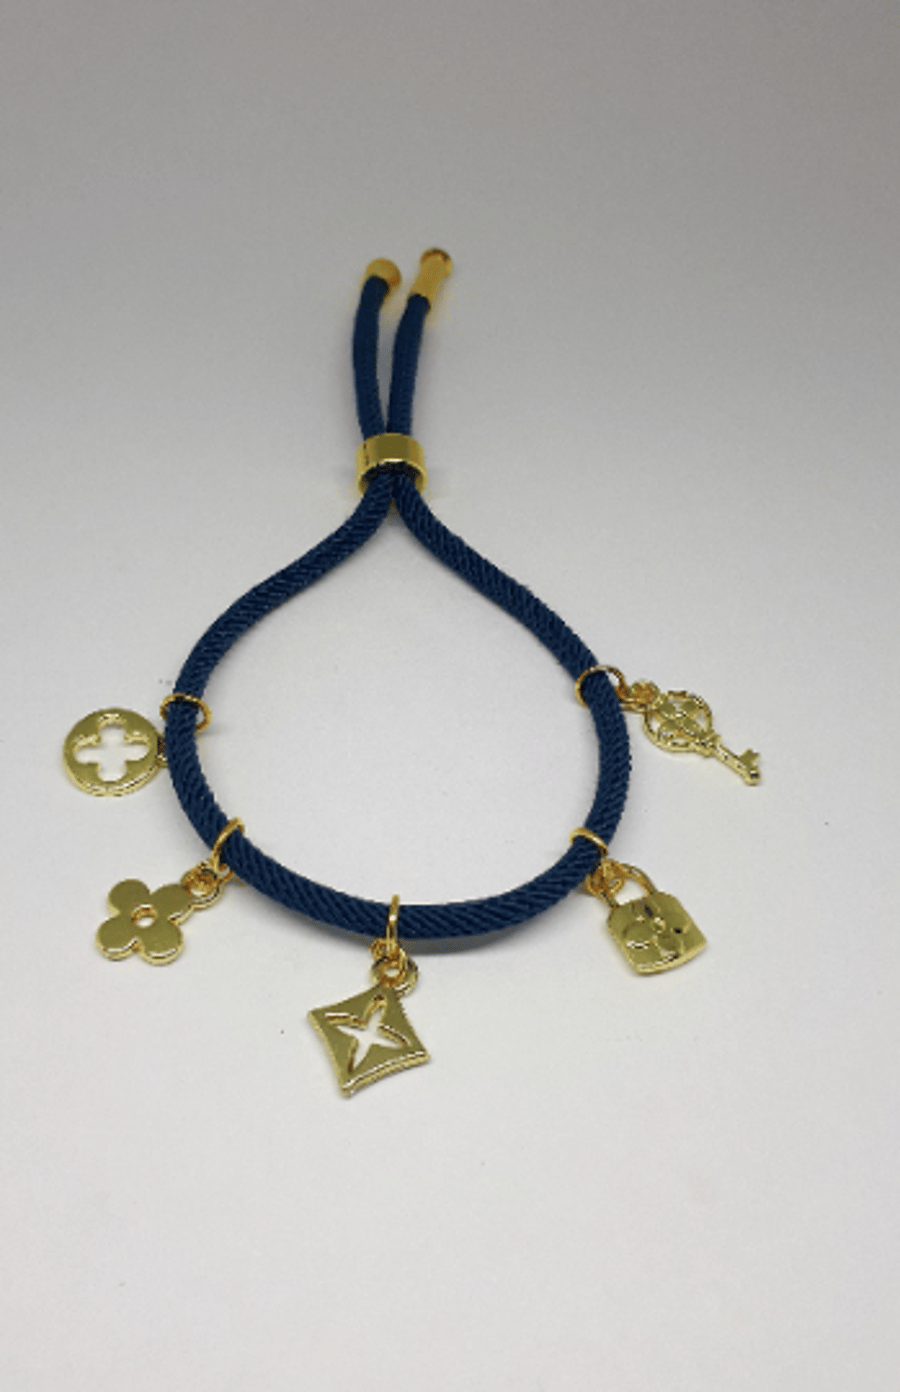 Cotton cord bracelet with gold motif charms